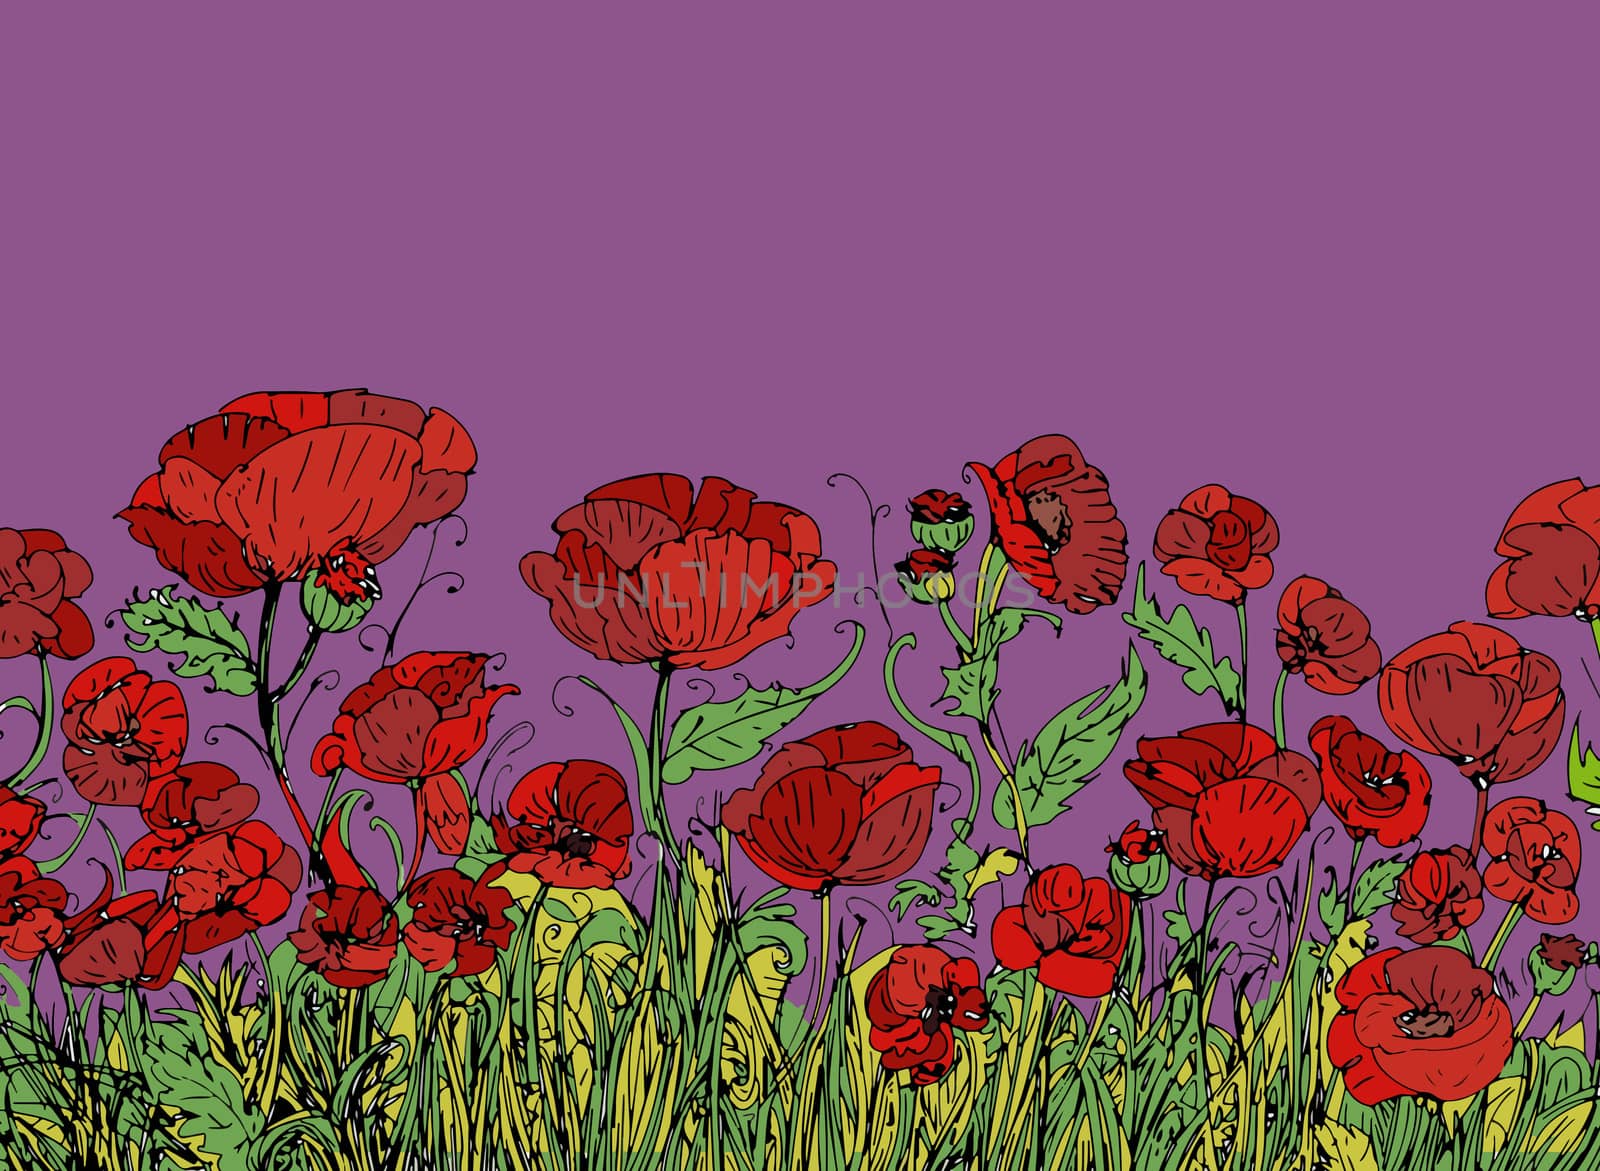 Field of red poppies